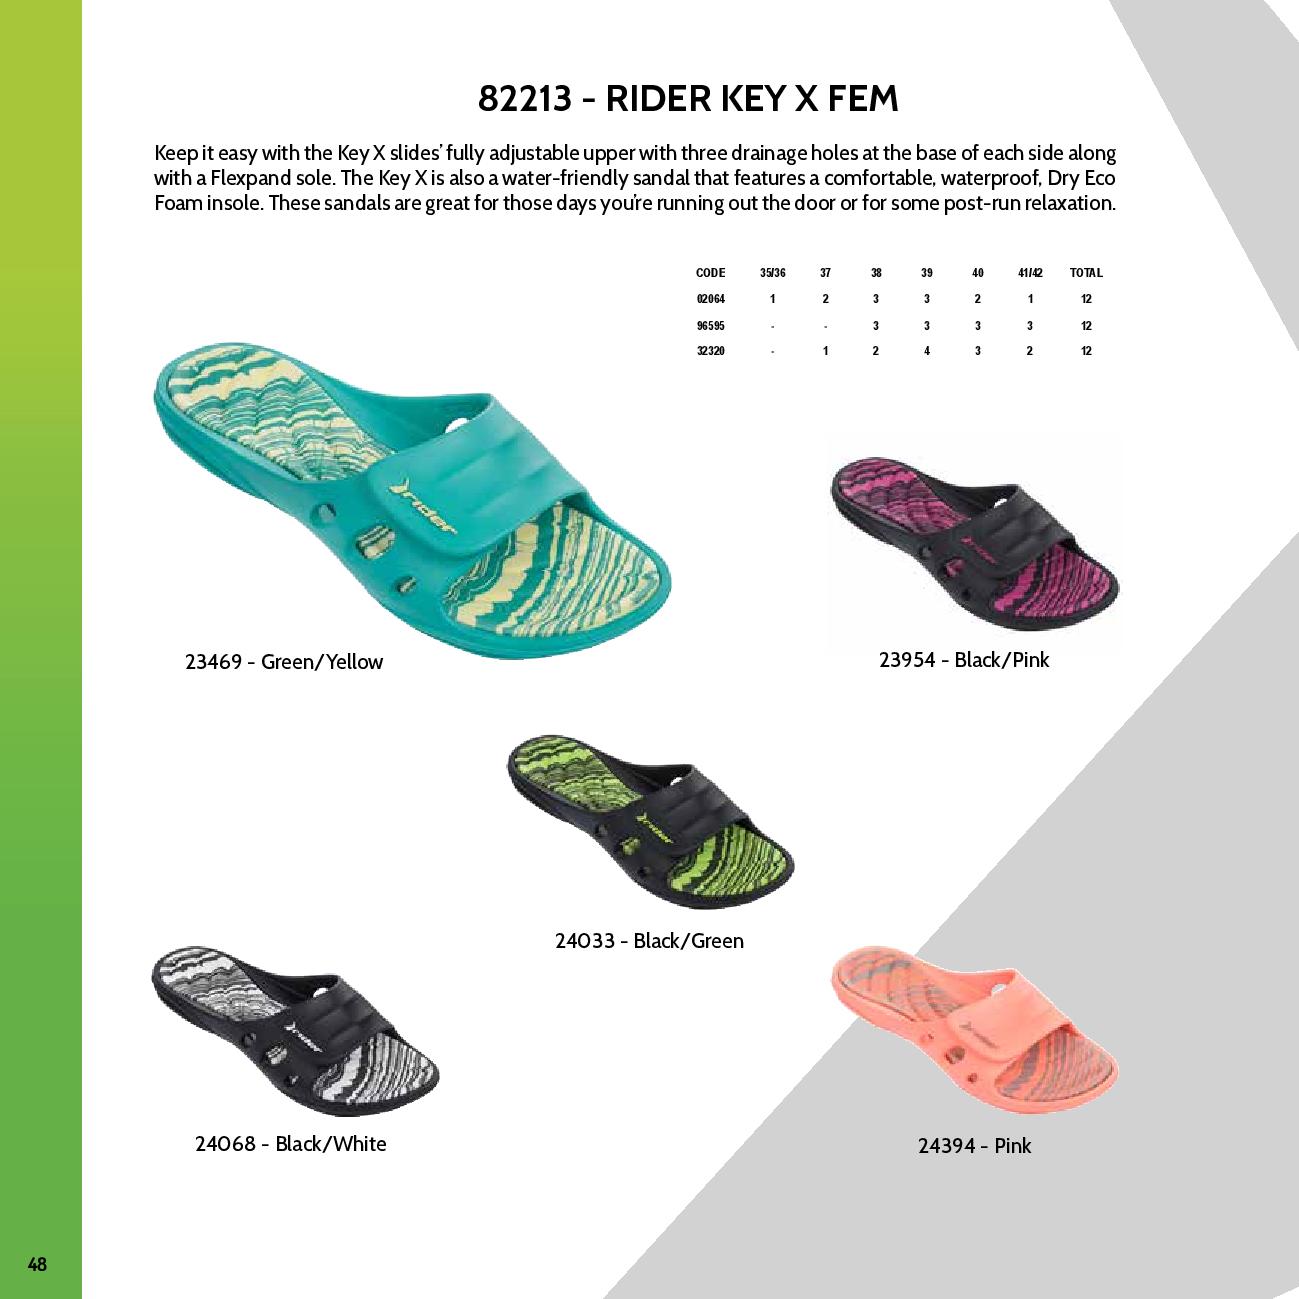 Rider_Catalogue_2018_low res